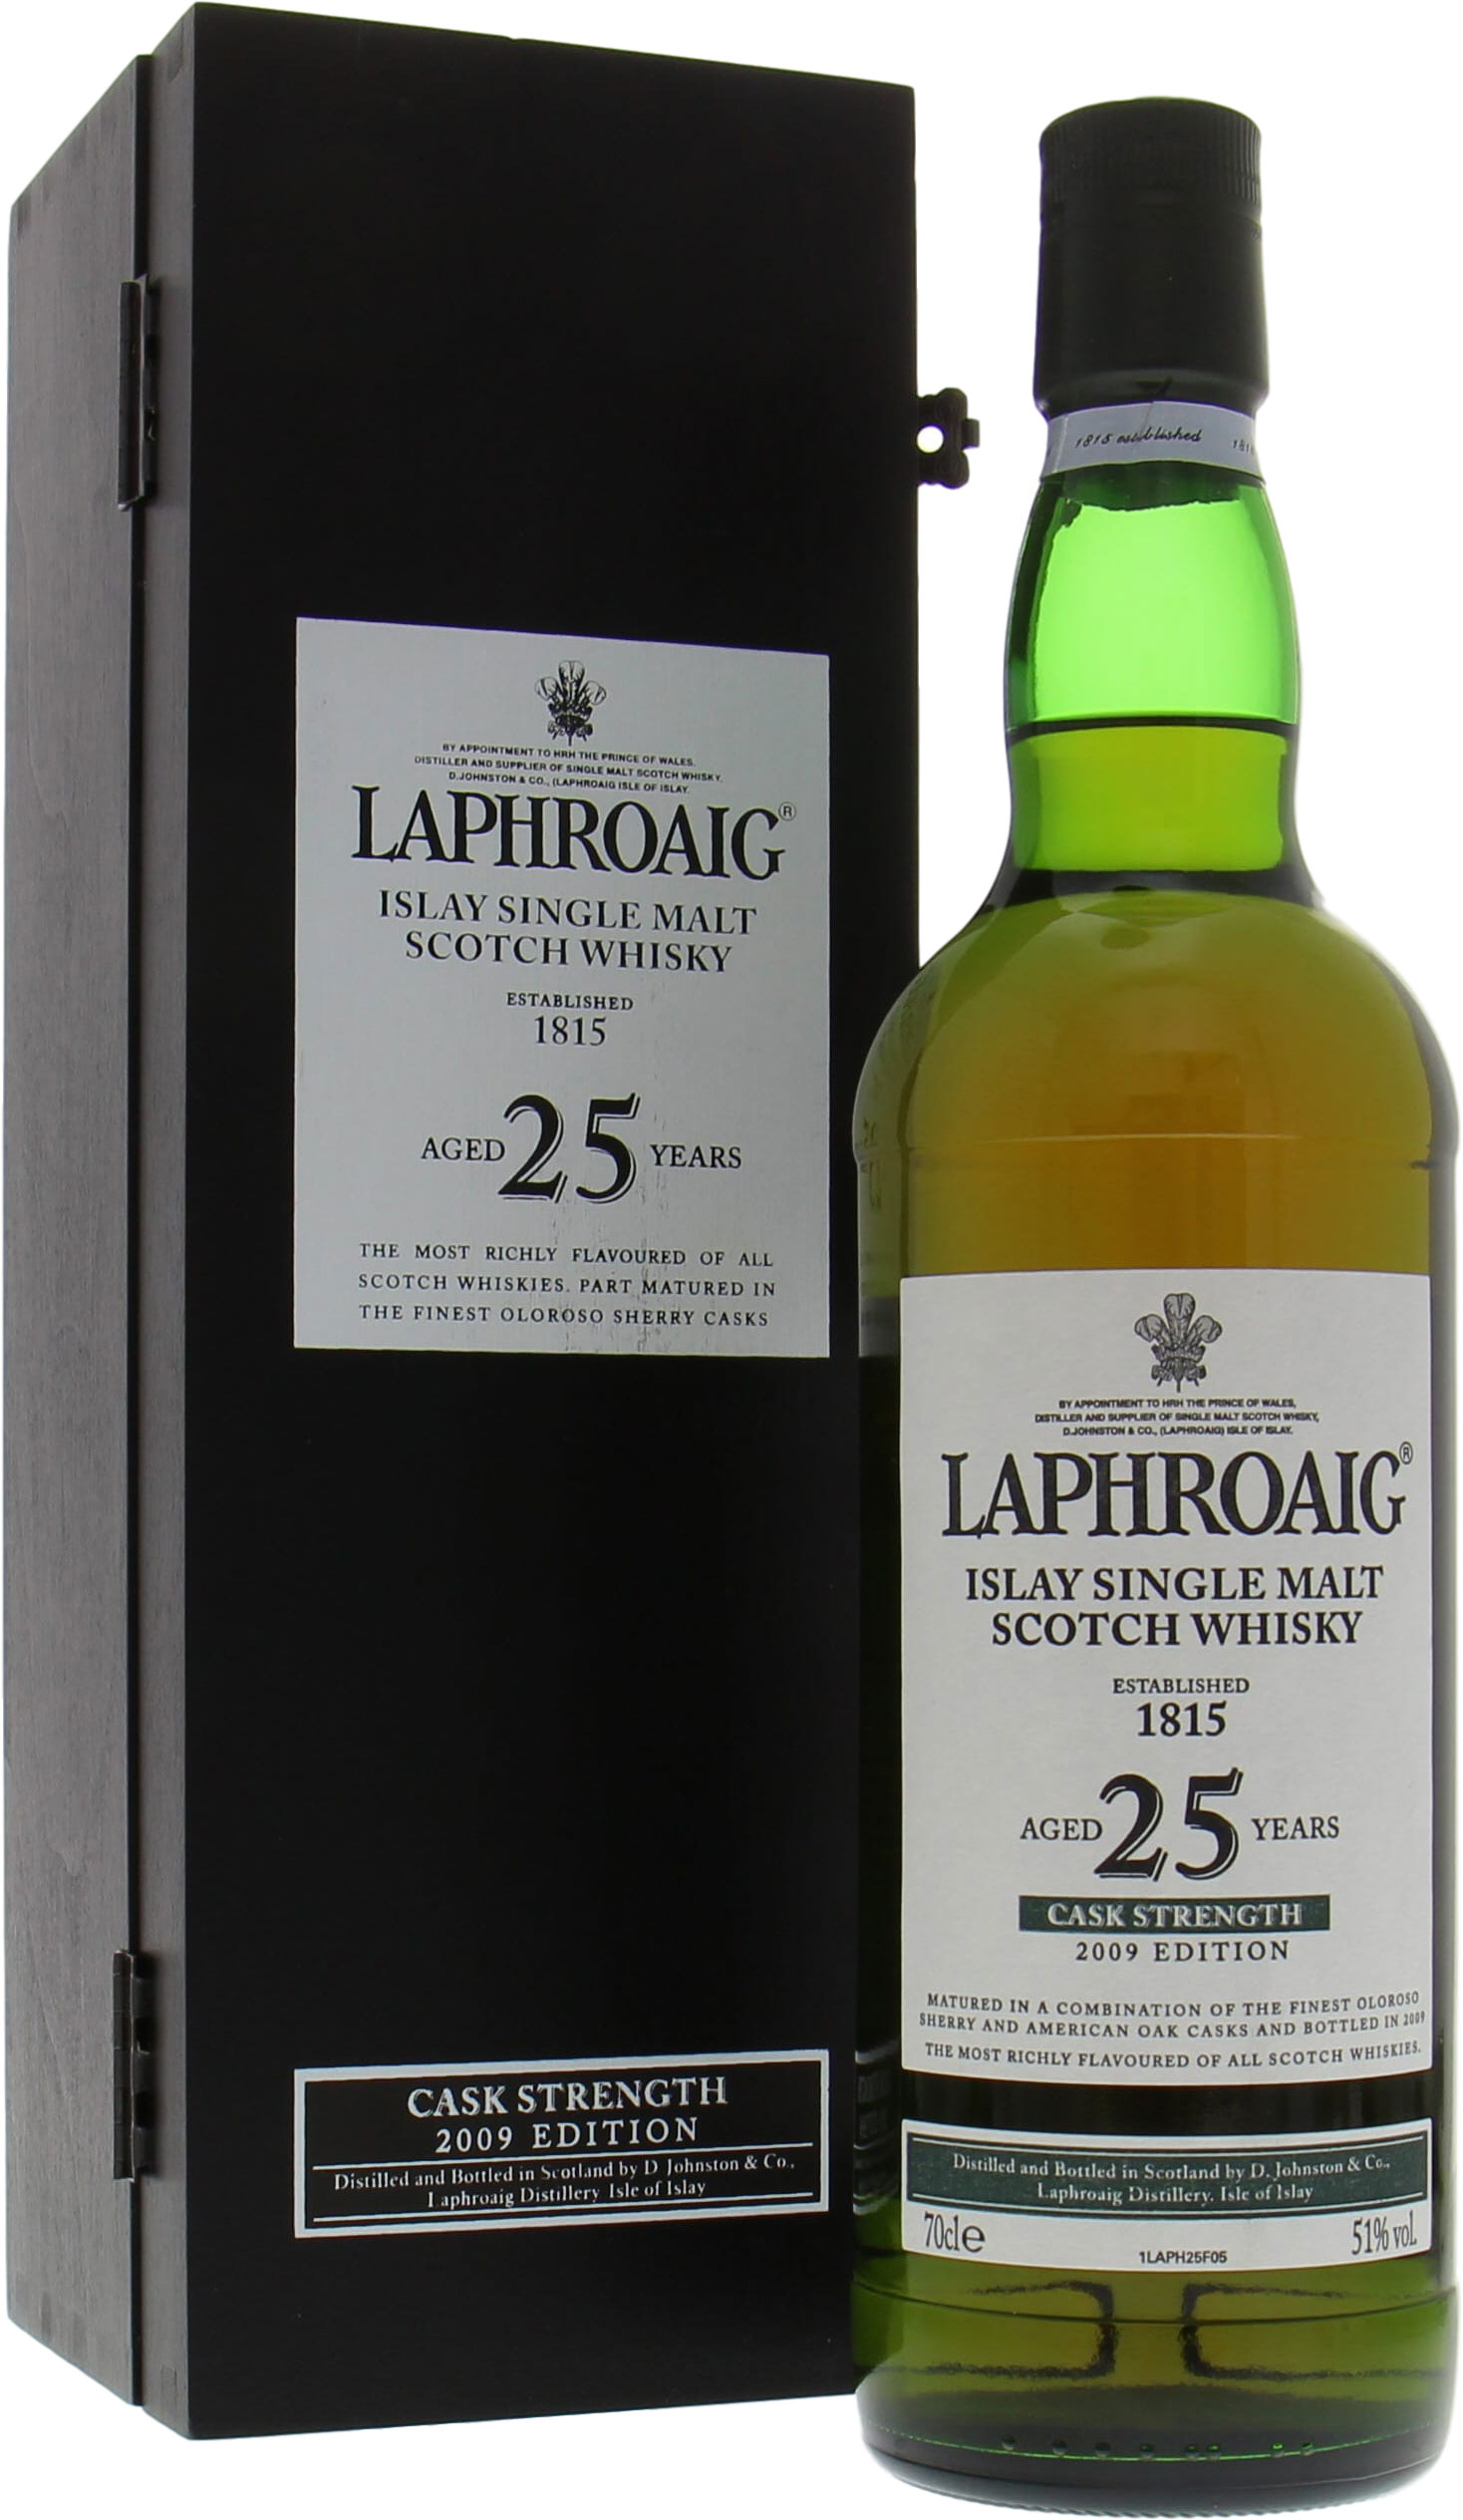 Laphroaig - 25 Years Old Cask Strength Edition 51% 2009 In Original Wooden Case